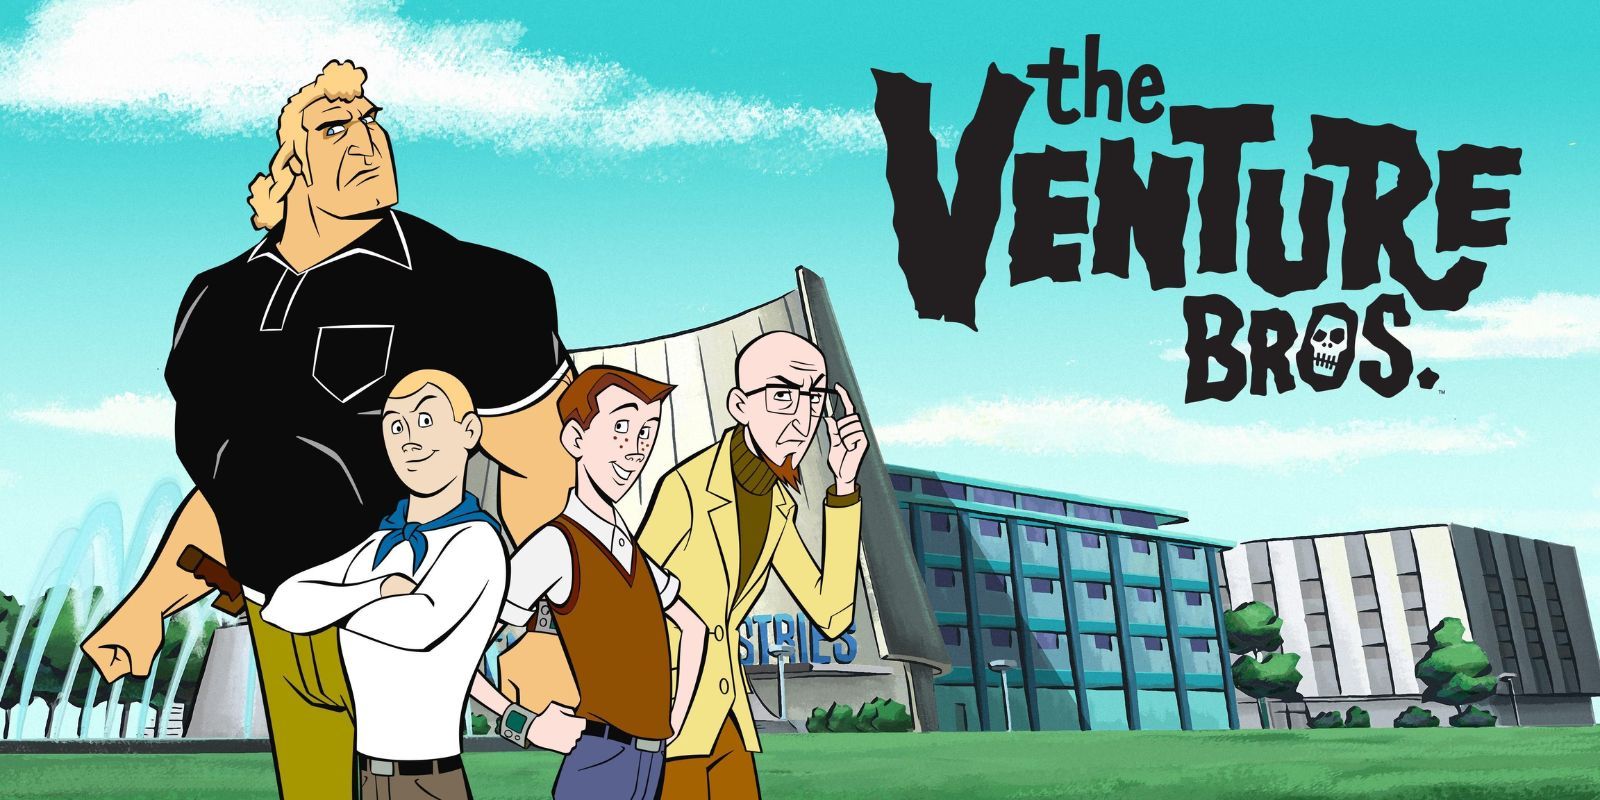 The cast of The Venture Bros.